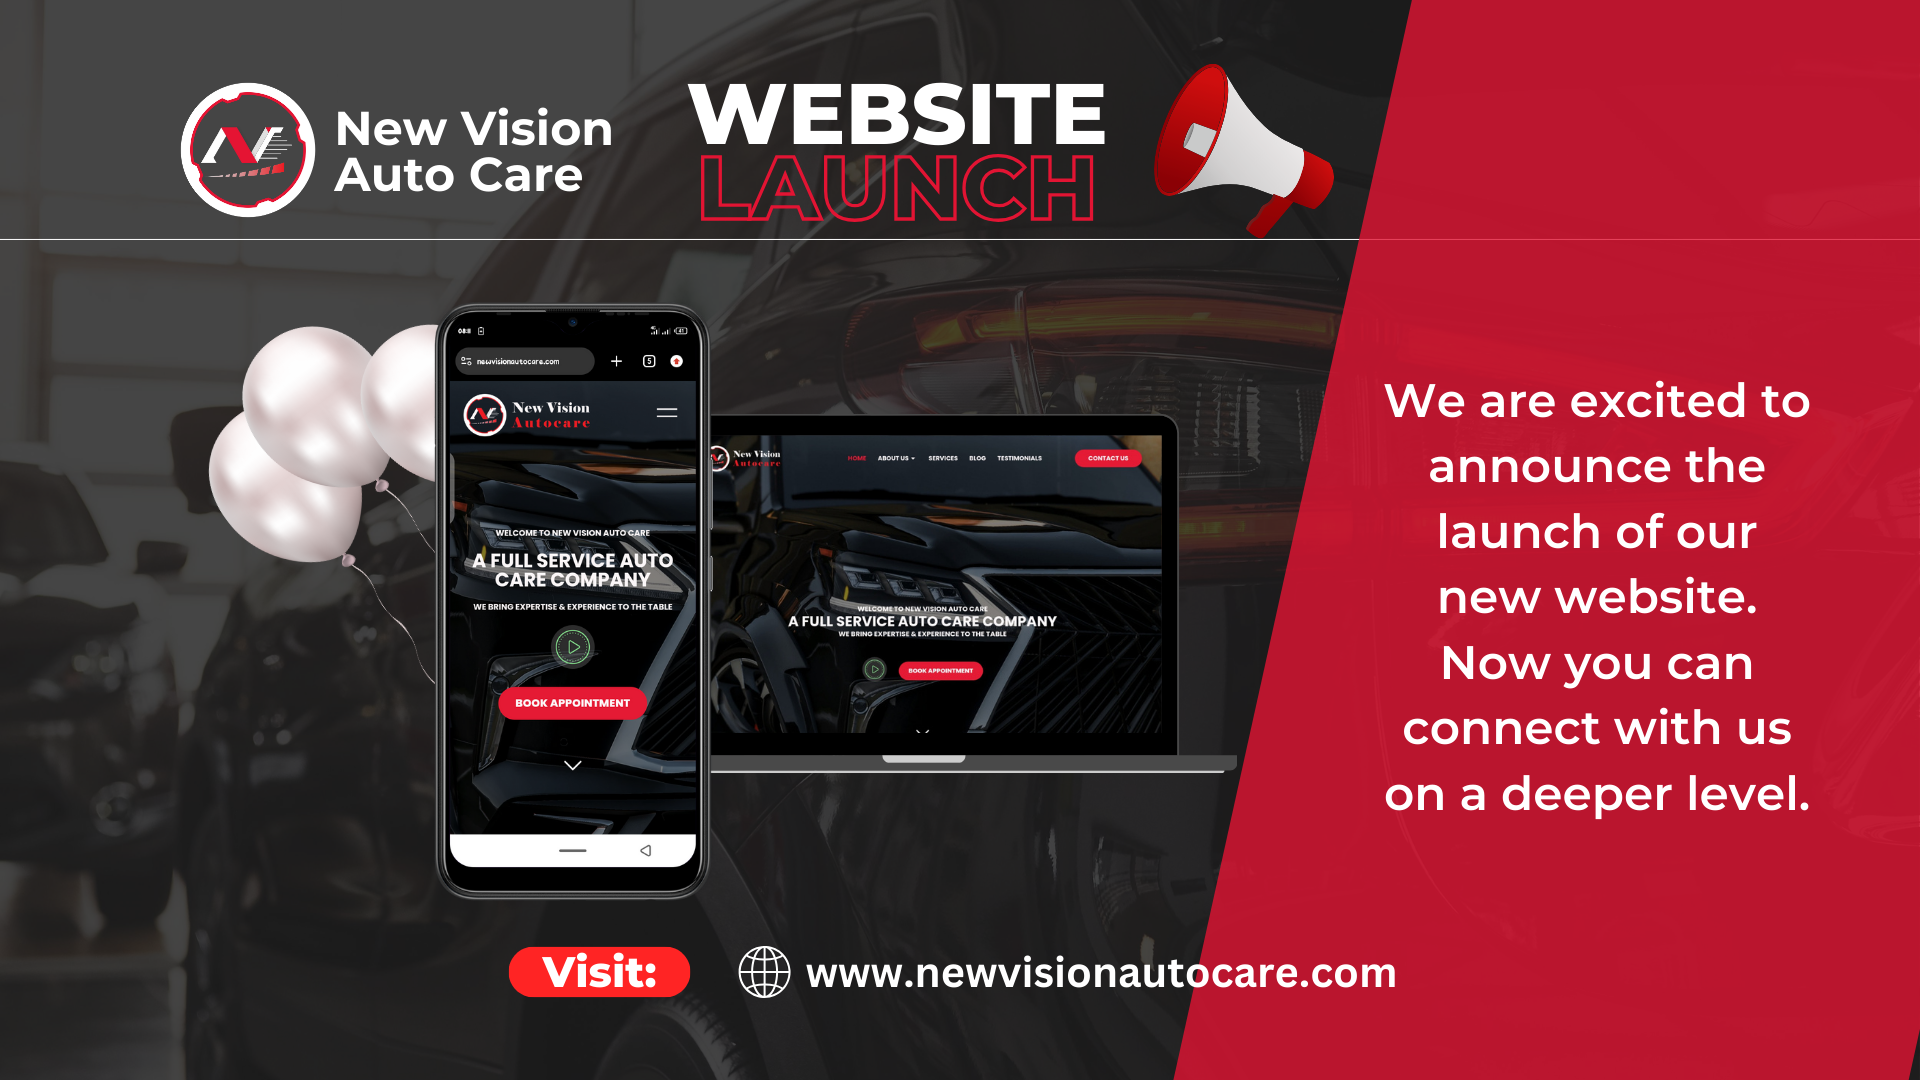 New Vision Auto Care Website Launch Image